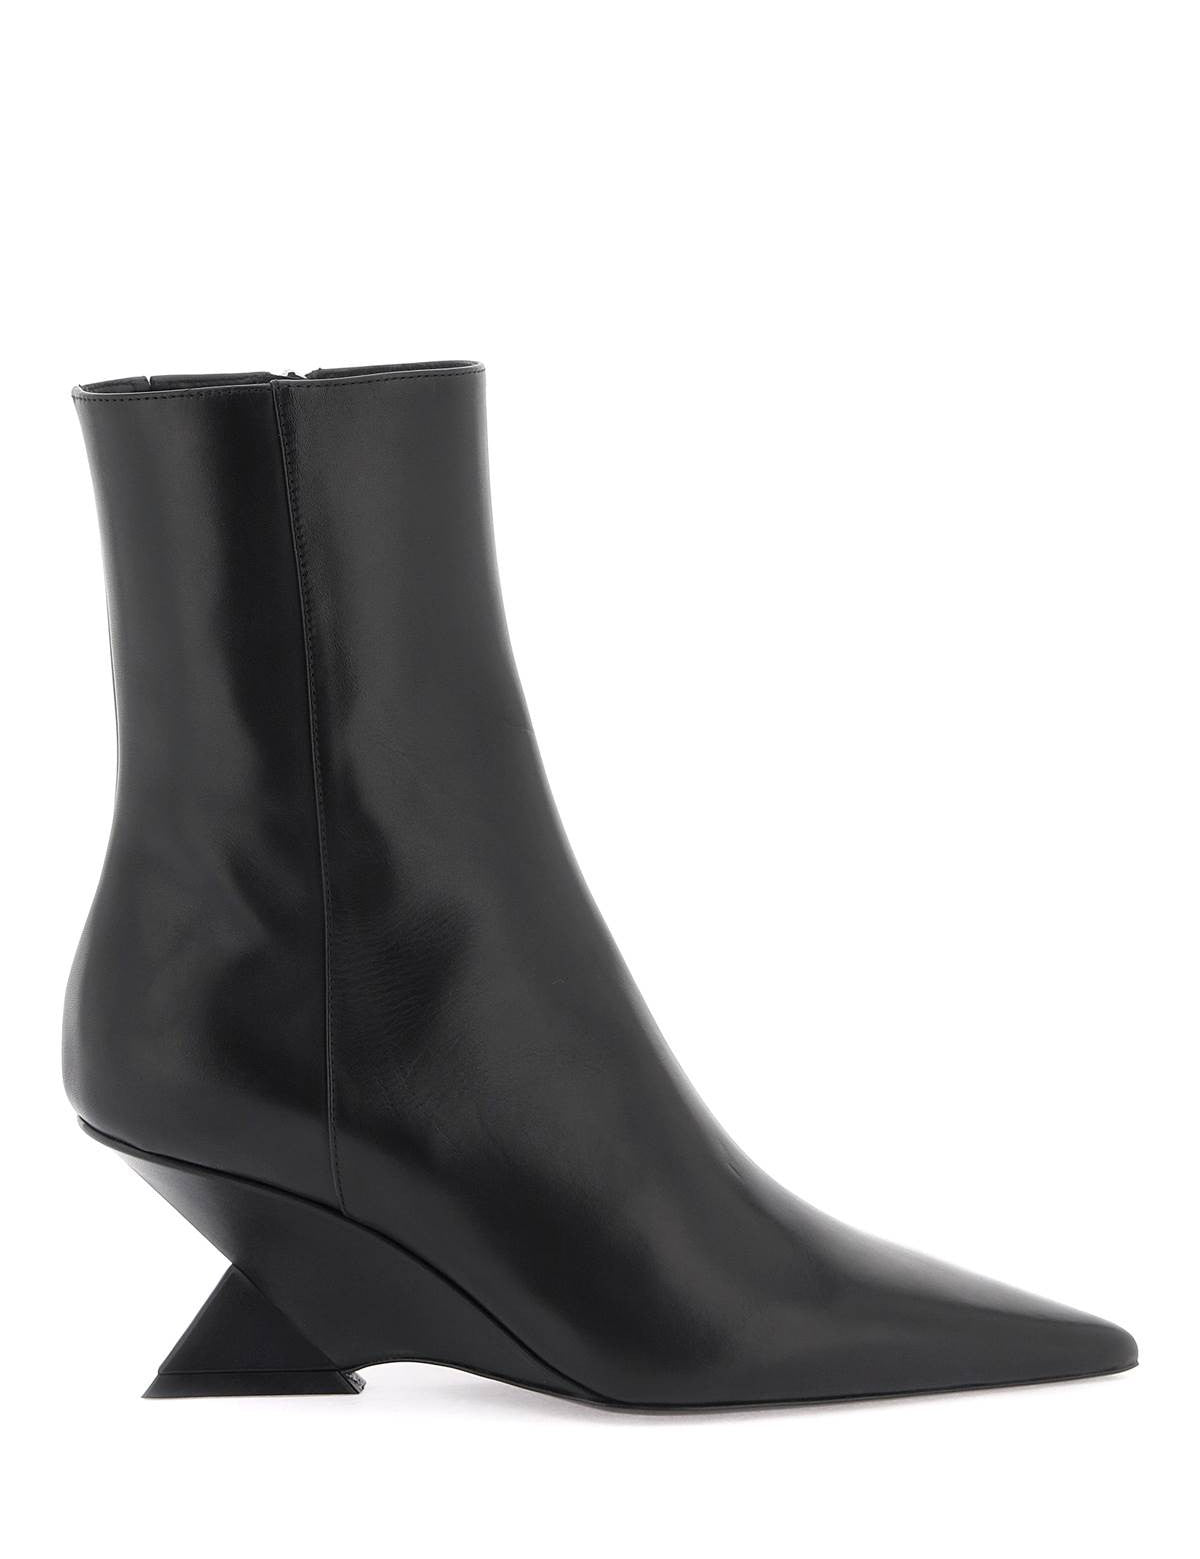 the-attico-cheope-ankle-boots.jpg